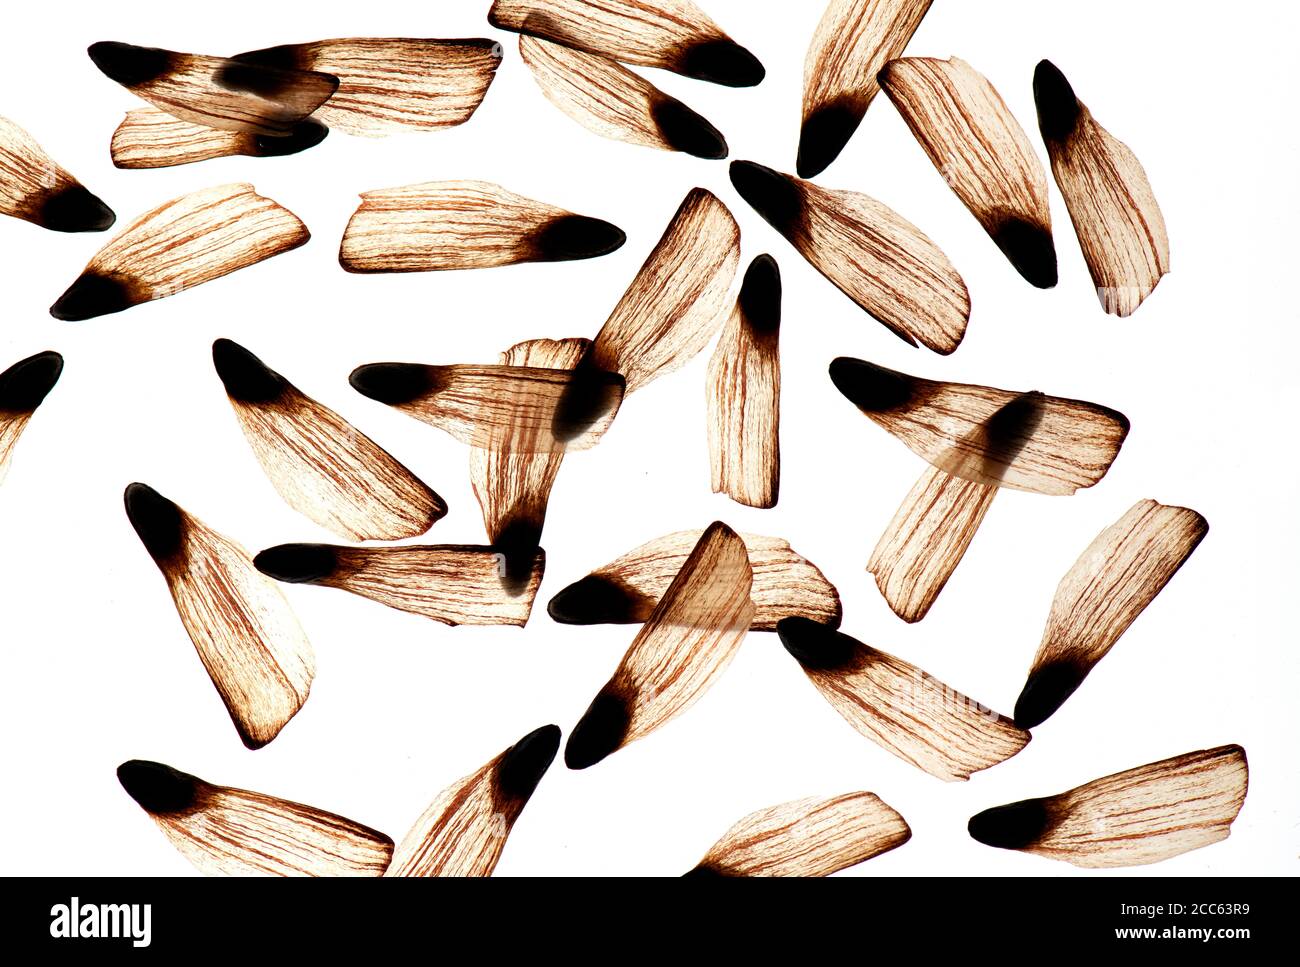 Seeds from Pine tree cone. Controlled conditions. Stock Photo